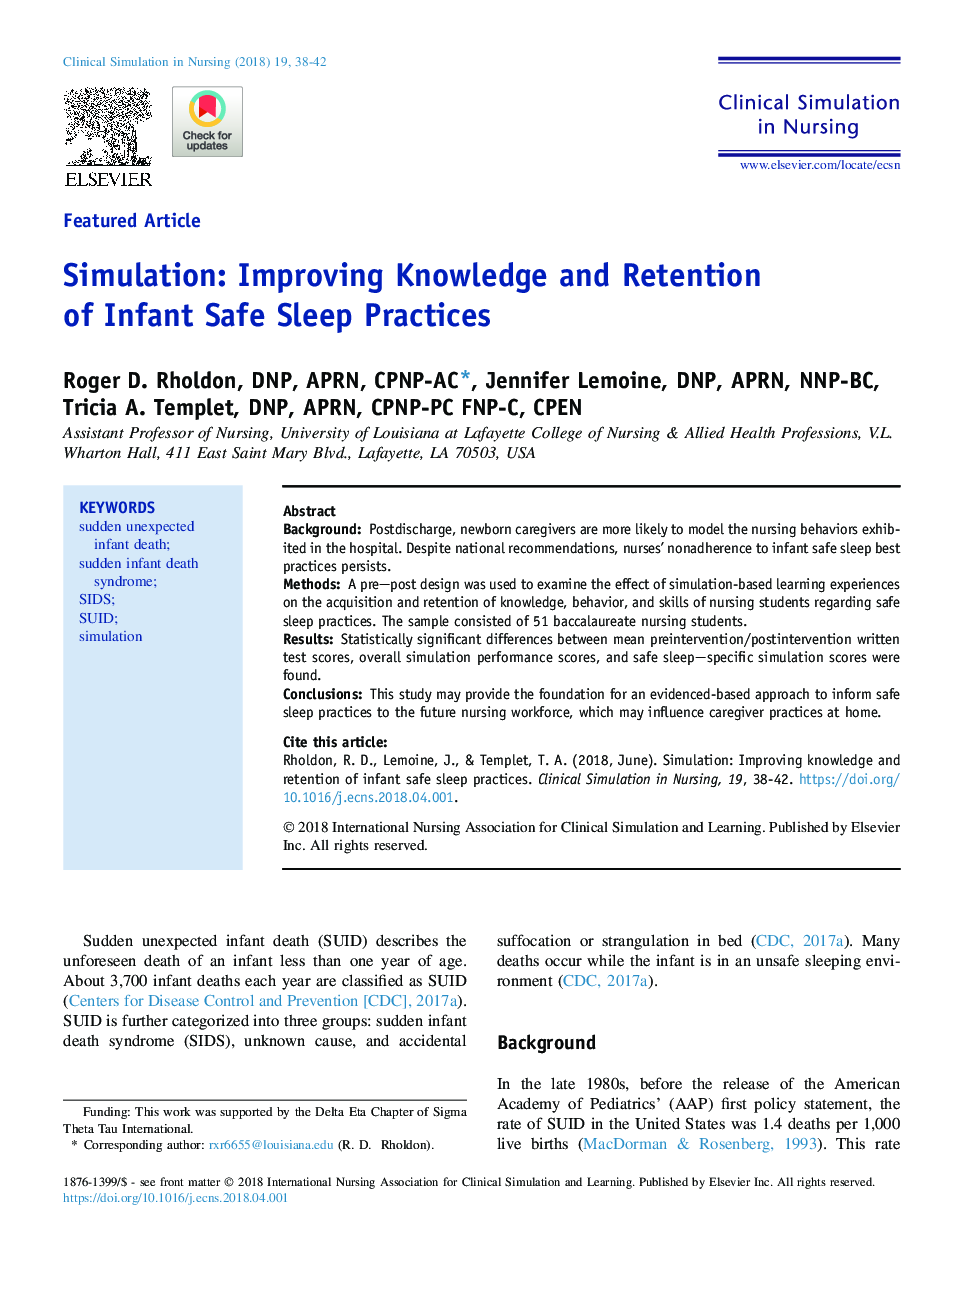 Simulation: Improving Knowledge and Retention of Infant Safe Sleep Practices